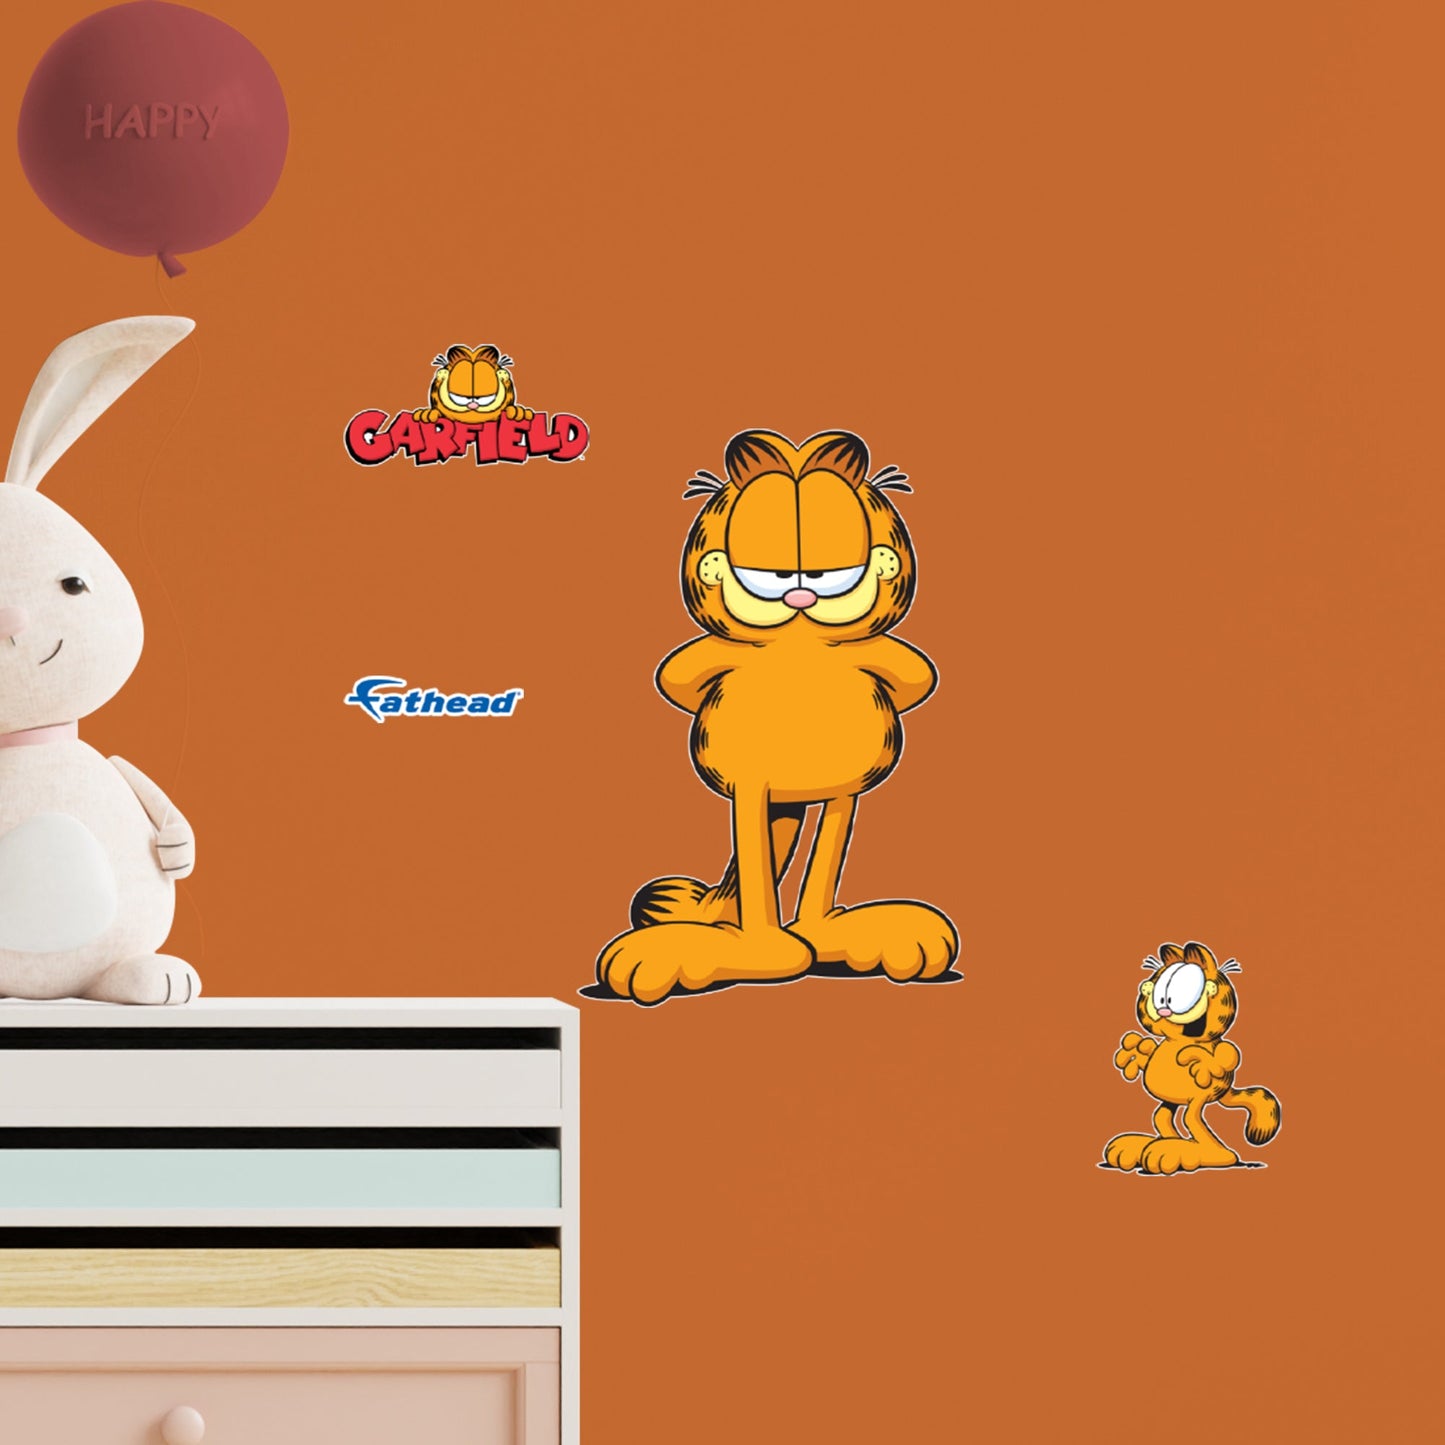 Garfield: Garfield RealBig - Officially Licensed Nickelodeon Removable Adhesive Decal